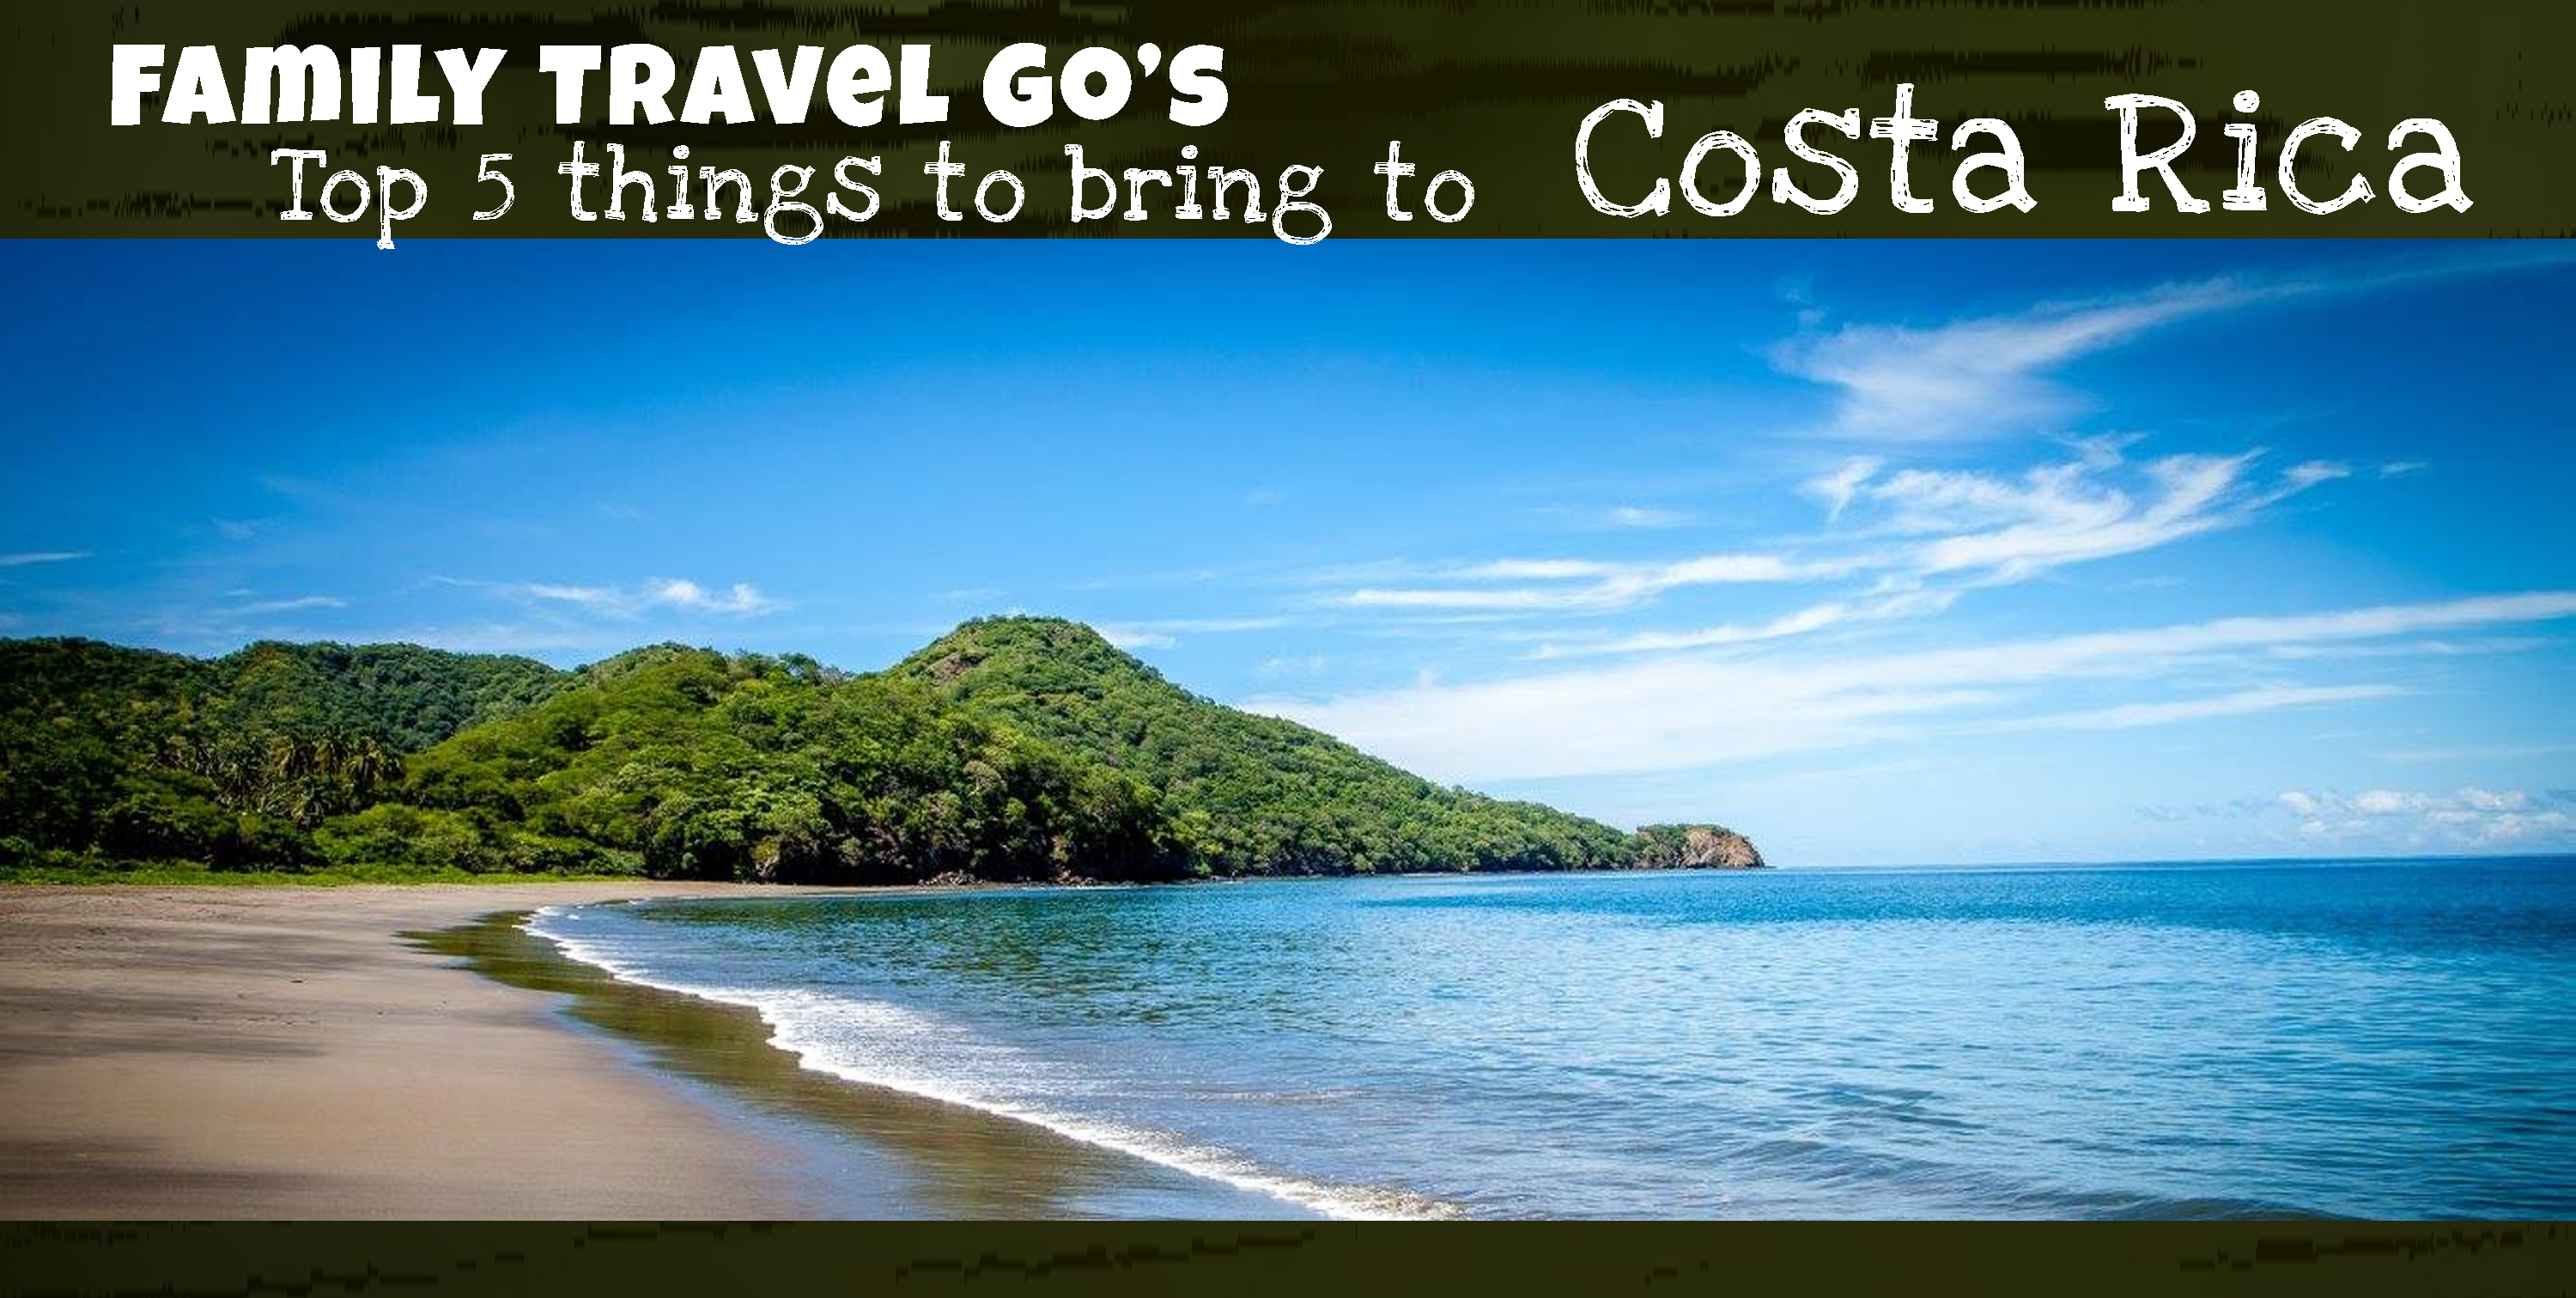 Top 5 Things you should bring to Costa Rica